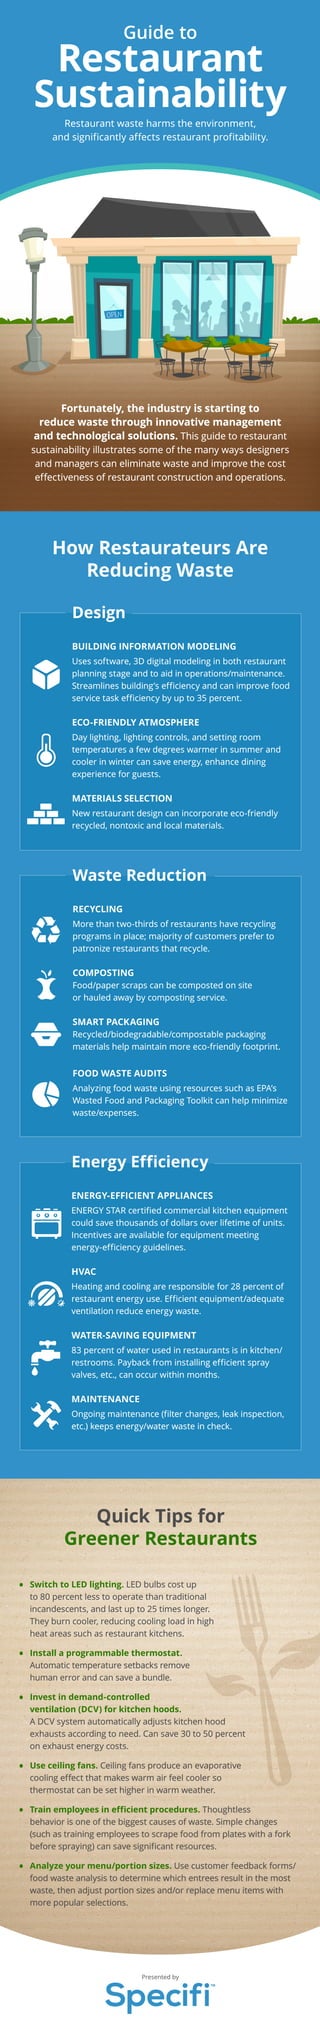 How Restaurateurs Are
Reducing Waste
• Switch to LED lighting. LED bulbs cost up
to 80 percent less to operate than traditional
incandescents, and last up to 25 times longer.
They burn cooler, reducing cooling load in high
heat areas such as restaurant kitchens.
• Install a programmable thermostat.
Automatic temperature setbacks remove
human error and can save a bundle.
• Invest in demand-controlled
ventilation (DCV) for kitchen hoods.
A DCV system automatically adjusts kitchen hood
exhausts according to need. Can save 30 to 50 percent
on exhaust energy costs.
• Use ceiling fans. Ceiling fans produce an evaporative
cooling effect that makes warm air feel cooler so
thermostat can be set higher in warm weather.
• Train employees in efficient procedures. Thoughtless
behavior is one of the biggest causes of waste. Simple changes
(such as training employees to scrape food from plates with a fork
before spraying) can save significant resources.
• Analyze your menu/portion sizes. Use customer feedback forms/
food waste analysis to determine which entrees result in the most
waste, then adjust portion sizes and/or replace menu items with
more popular selections.
Guide to
Restaurant
Sustainability
Waste Reduction
RECYCLING
More than two-thirds of restaurants have recycling
programs in place; majority of customers prefer to
patronize restaurants that recycle.
COMPOSTING
Food/paper scraps can be composted on site
or hauled away by composting service.
SMART PACKAGING
Recycled/biodegradable/compostable packaging
materials help maintain more eco-friendly footprint.
FOOD WASTE AUDITS
Analyzing food waste using resources such as EPA’s
Wasted Food and Packaging Toolkit can help minimize
waste/expenses.
Presented by
Design
BUILDING INFORMATION MODELING
Uses software, 3D digital modeling in both restaurant
planning stage and to aid in operations/maintenance.
Streamlines building’s efficiency and can improve food
service task efficiency by up to 35 percent.
ECO-FRIENDLY ATMOSPHERE
Day lighting, lighting controls, and setting room
temperatures a few degrees warmer in summer and
cooler in winter can save energy, enhance dining
experience for guests.
MATERIALS SELECTION
New restaurant design can incorporate eco-friendly
recycled, nontoxic and local materials.
Energy Efficiency
ENERGY-EFFICIENT APPLIANCES
ENERGY STAR certified commercial kitchen equipment
could save thousands of dollars over lifetime of units.
Incentives are available for equipment meeting
energy-efficiency guidelines.
HVAC
Heating and cooling are responsible for 28 percent of
restaurant energy use. Efficient equipment/adequate
ventilation reduce energy waste.
WATER-SAVING EQUIPMENT
83 percent of water used in restaurants is in kitchen/
restrooms. Payback from installing efficient spray
valves, etc., can occur within months.
MAINTENANCE
Ongoing maintenance (filter changes, leak inspection,
etc.) keeps energy/water waste in check.
Quick Tips for
Greener Restaurants
Restaurant waste harms the environment,
and significantly affects restaurant profitability.
Fortunately, the industry is starting to
reduce waste through innovative management
and technological solutions. This guide to restaurant
sustainability illustrates some of the many ways designers
and managers can eliminate waste and improve the cost
effectiveness of restaurant construction and operations.
 